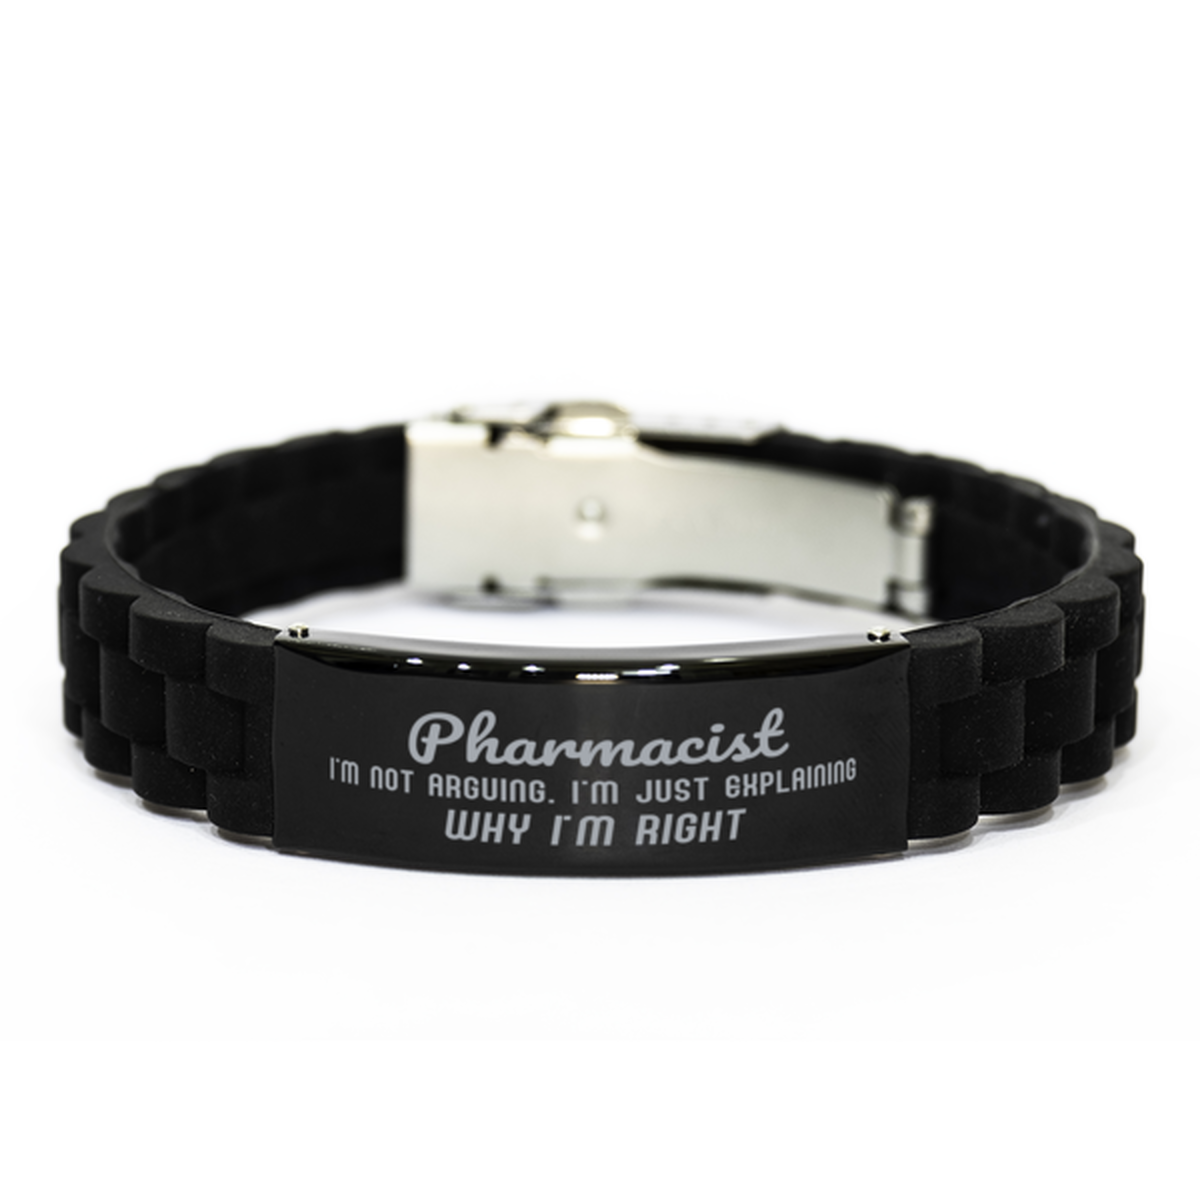 Pharmacist I'm not Arguing. I'm Just Explaining Why I'm RIGHT Black Glidelock Clasp Bracelet, Funny Saying Quote Pharmacist Gifts For Pharmacist Graduation Birthday Christmas Gifts for Men Women Coworker